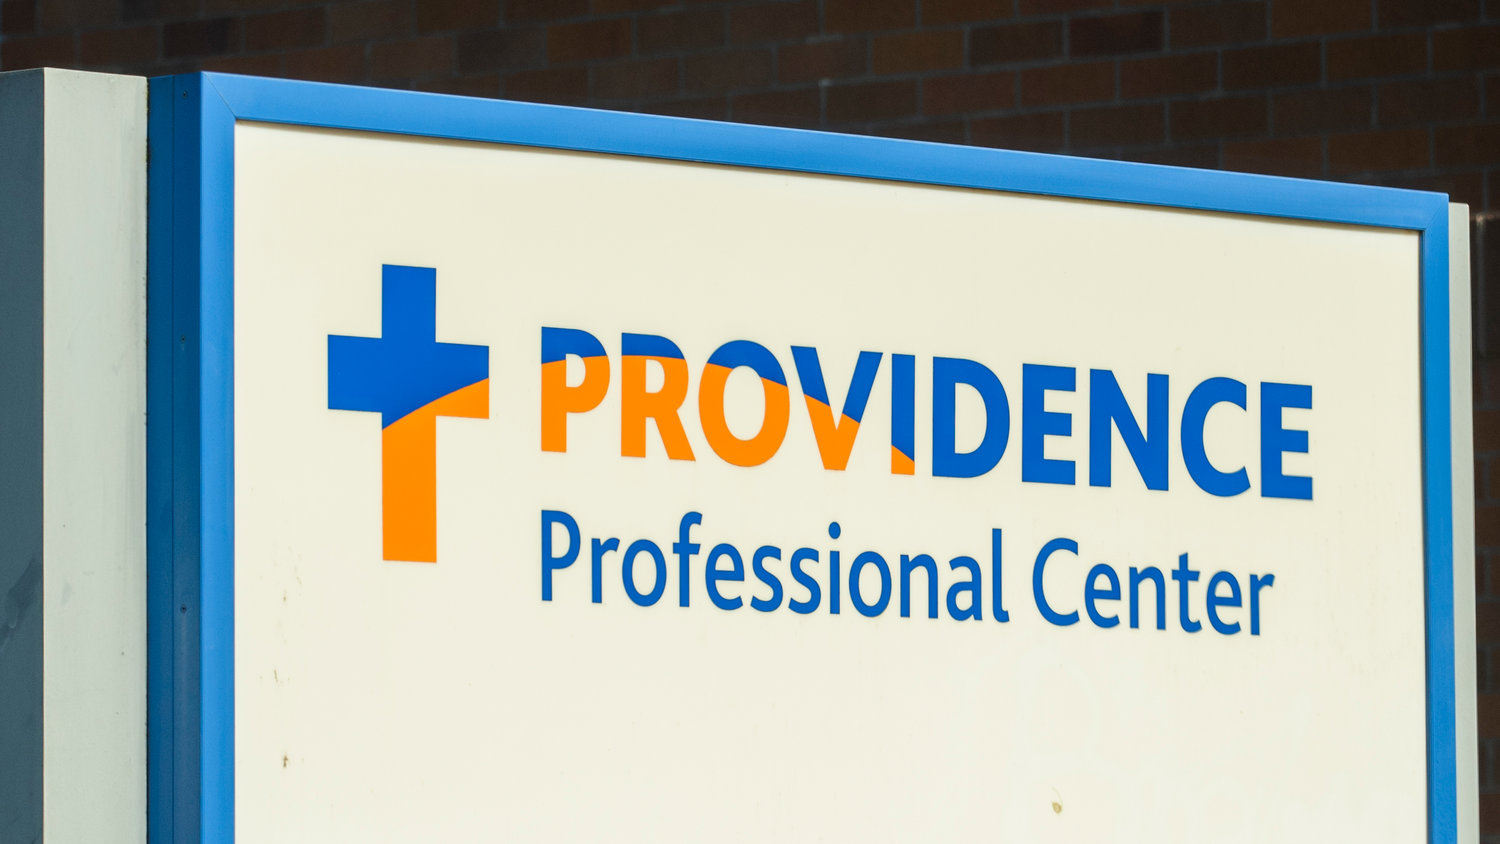 Providence Professional Center is located at 1010 South Scheuber Road in Centralia.